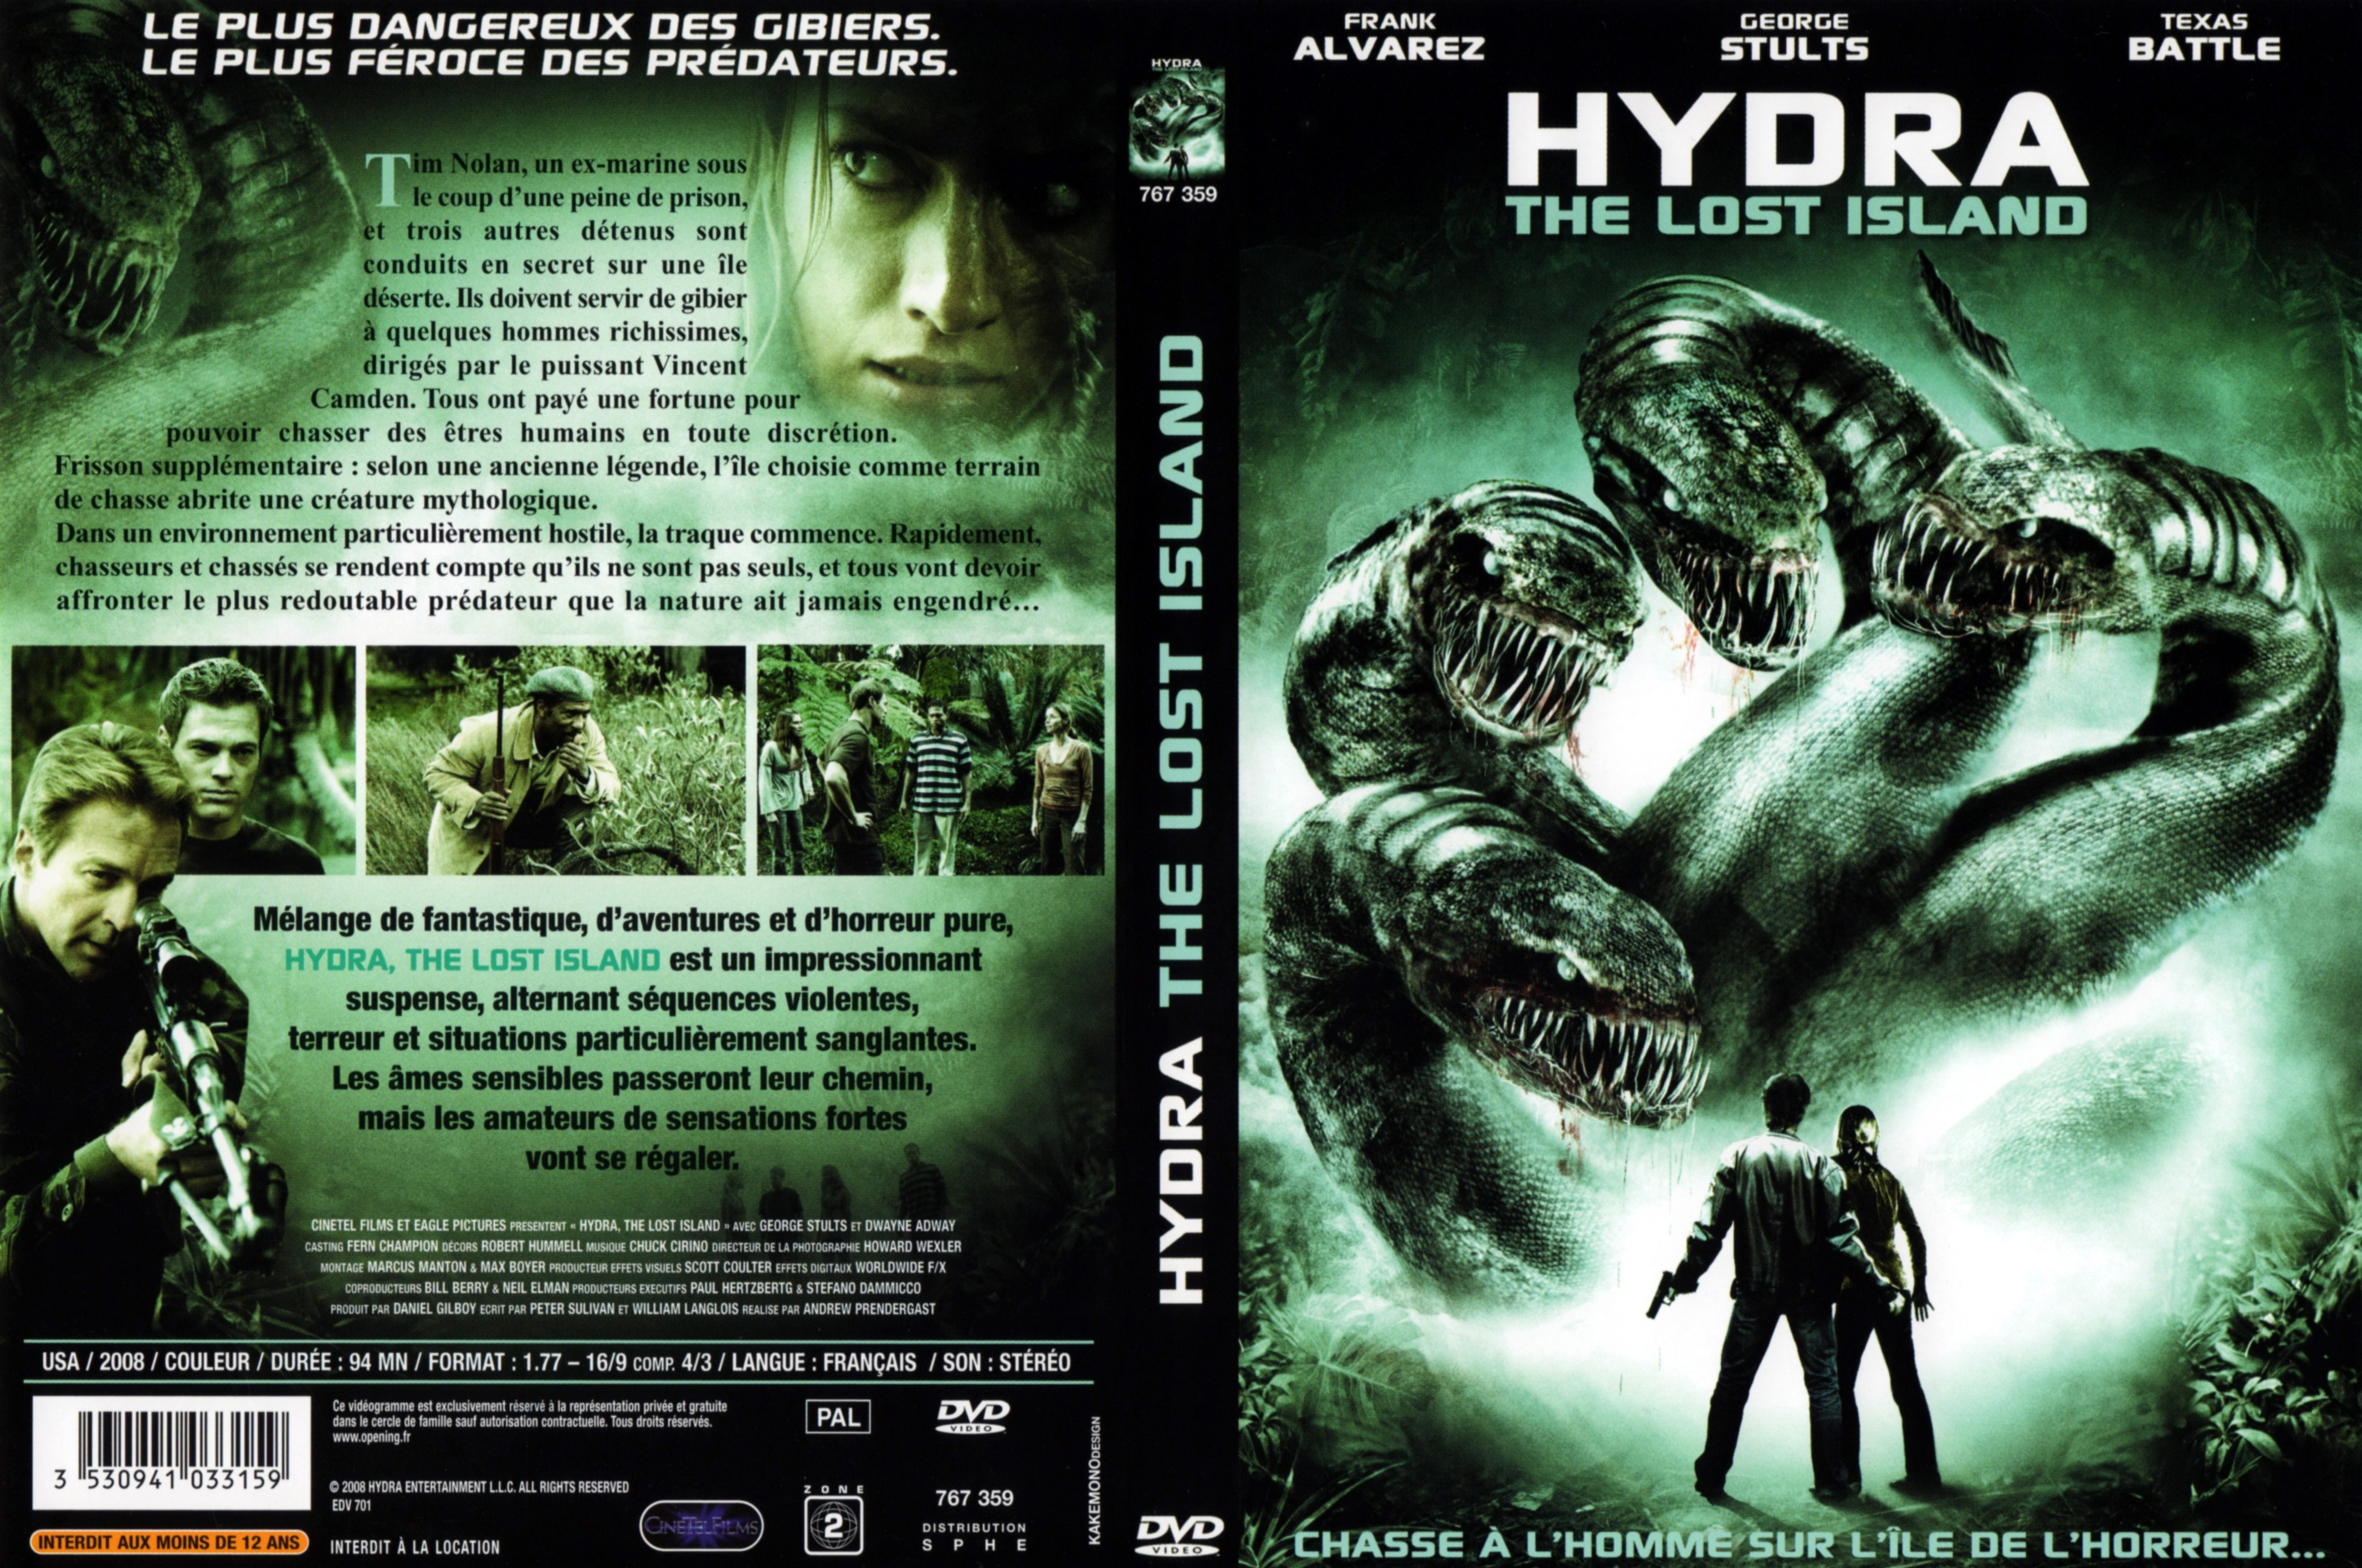 Jaquette DVD Hydra the lost island